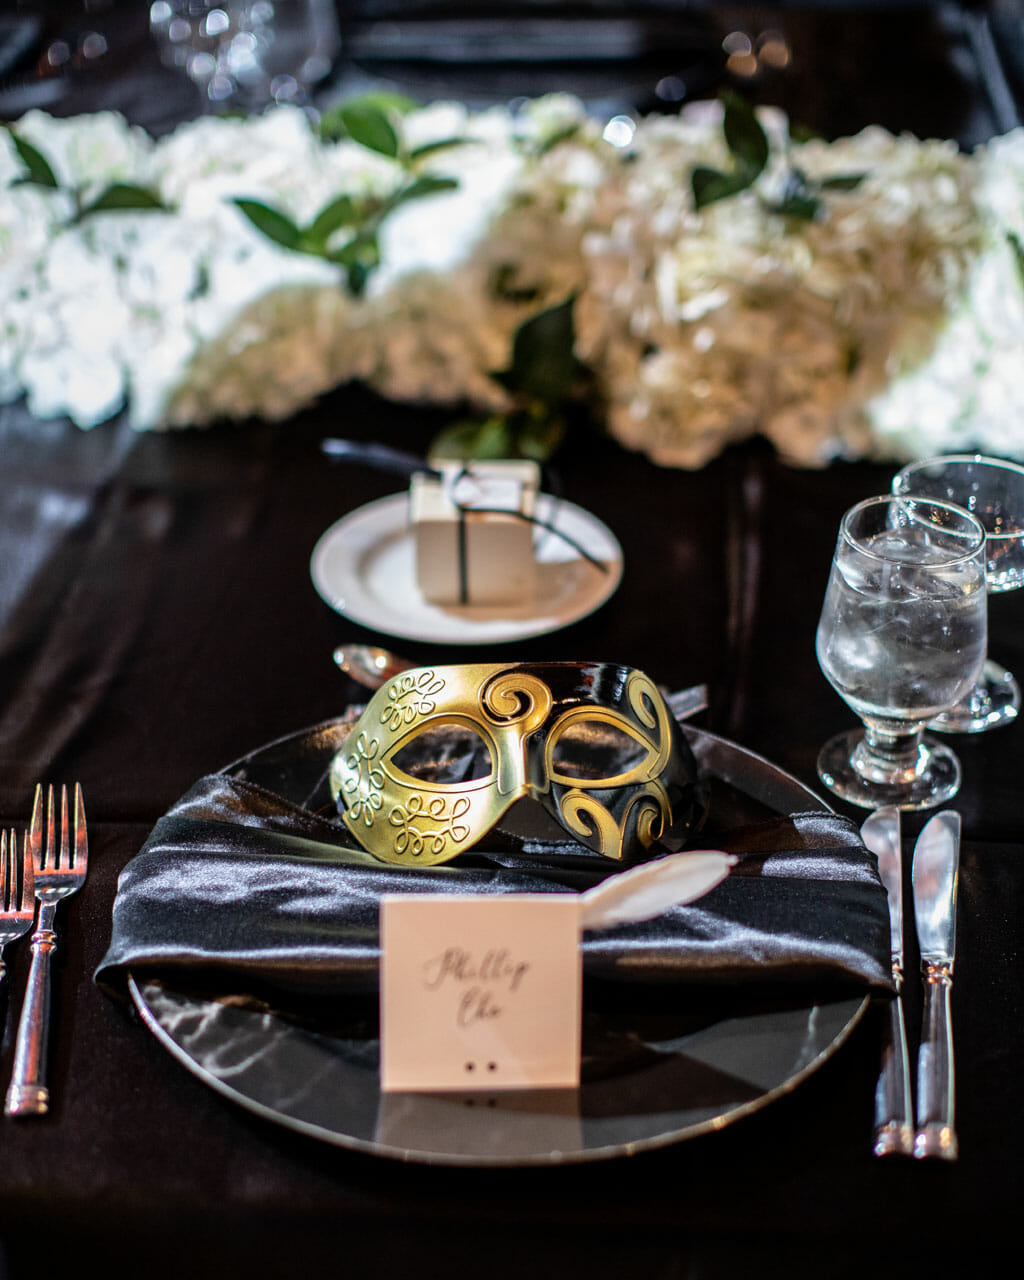 mardi gras themed wedding reception table setup with gold mask and black linen